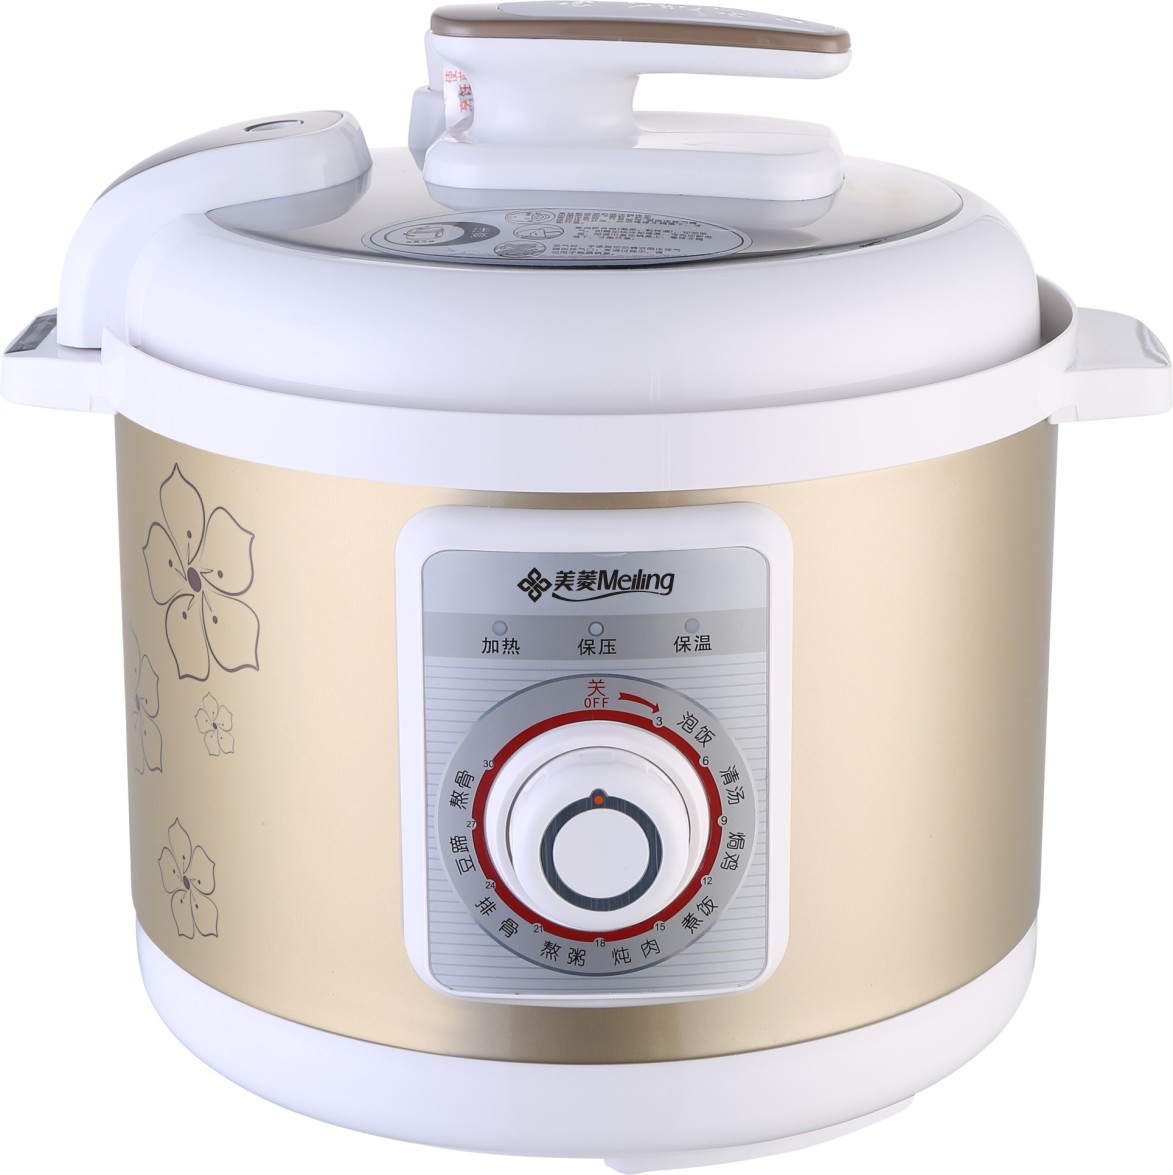 Multi function knob mechanical control electric pressure cooker with non-stick coating inner pot